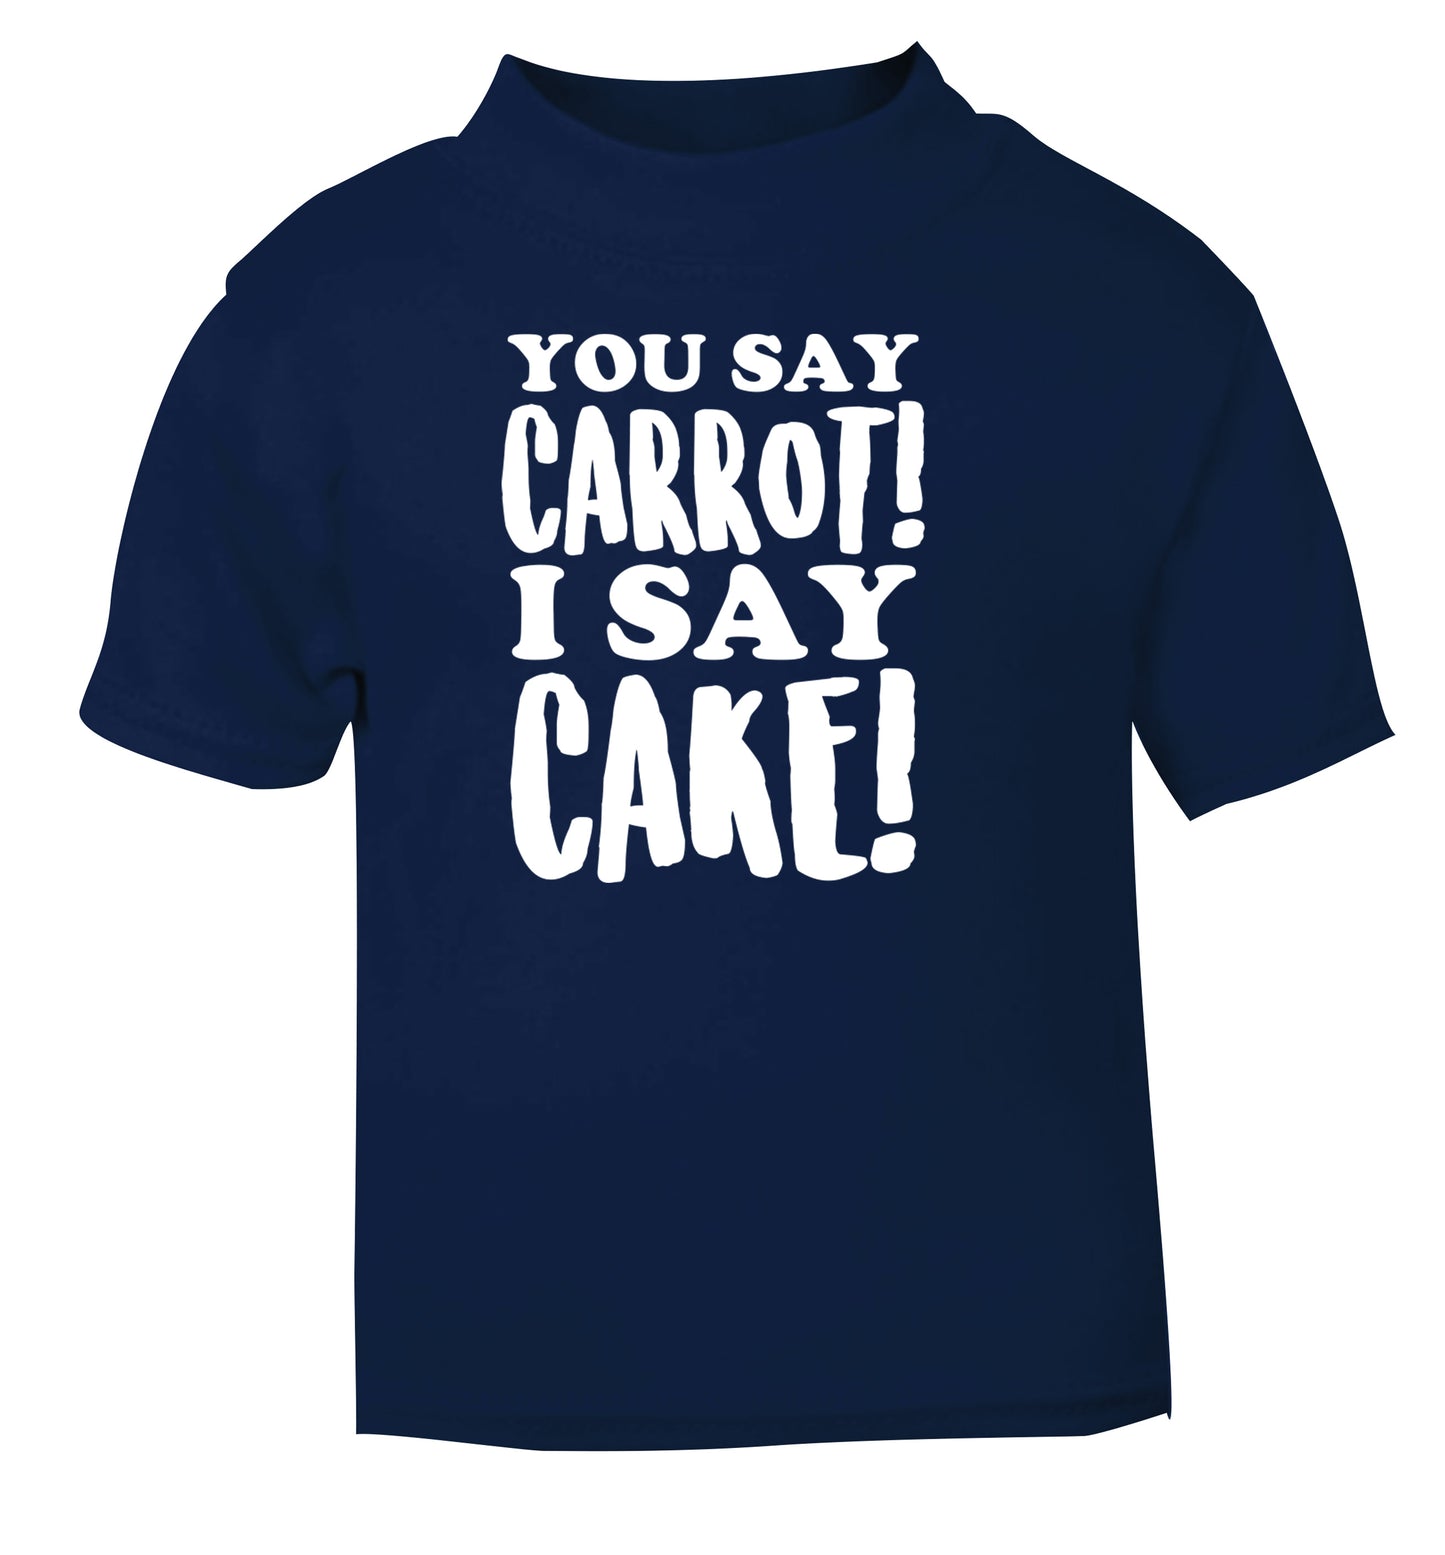 You say carrot I say cake! navy Baby Toddler Tshirt 2 Years